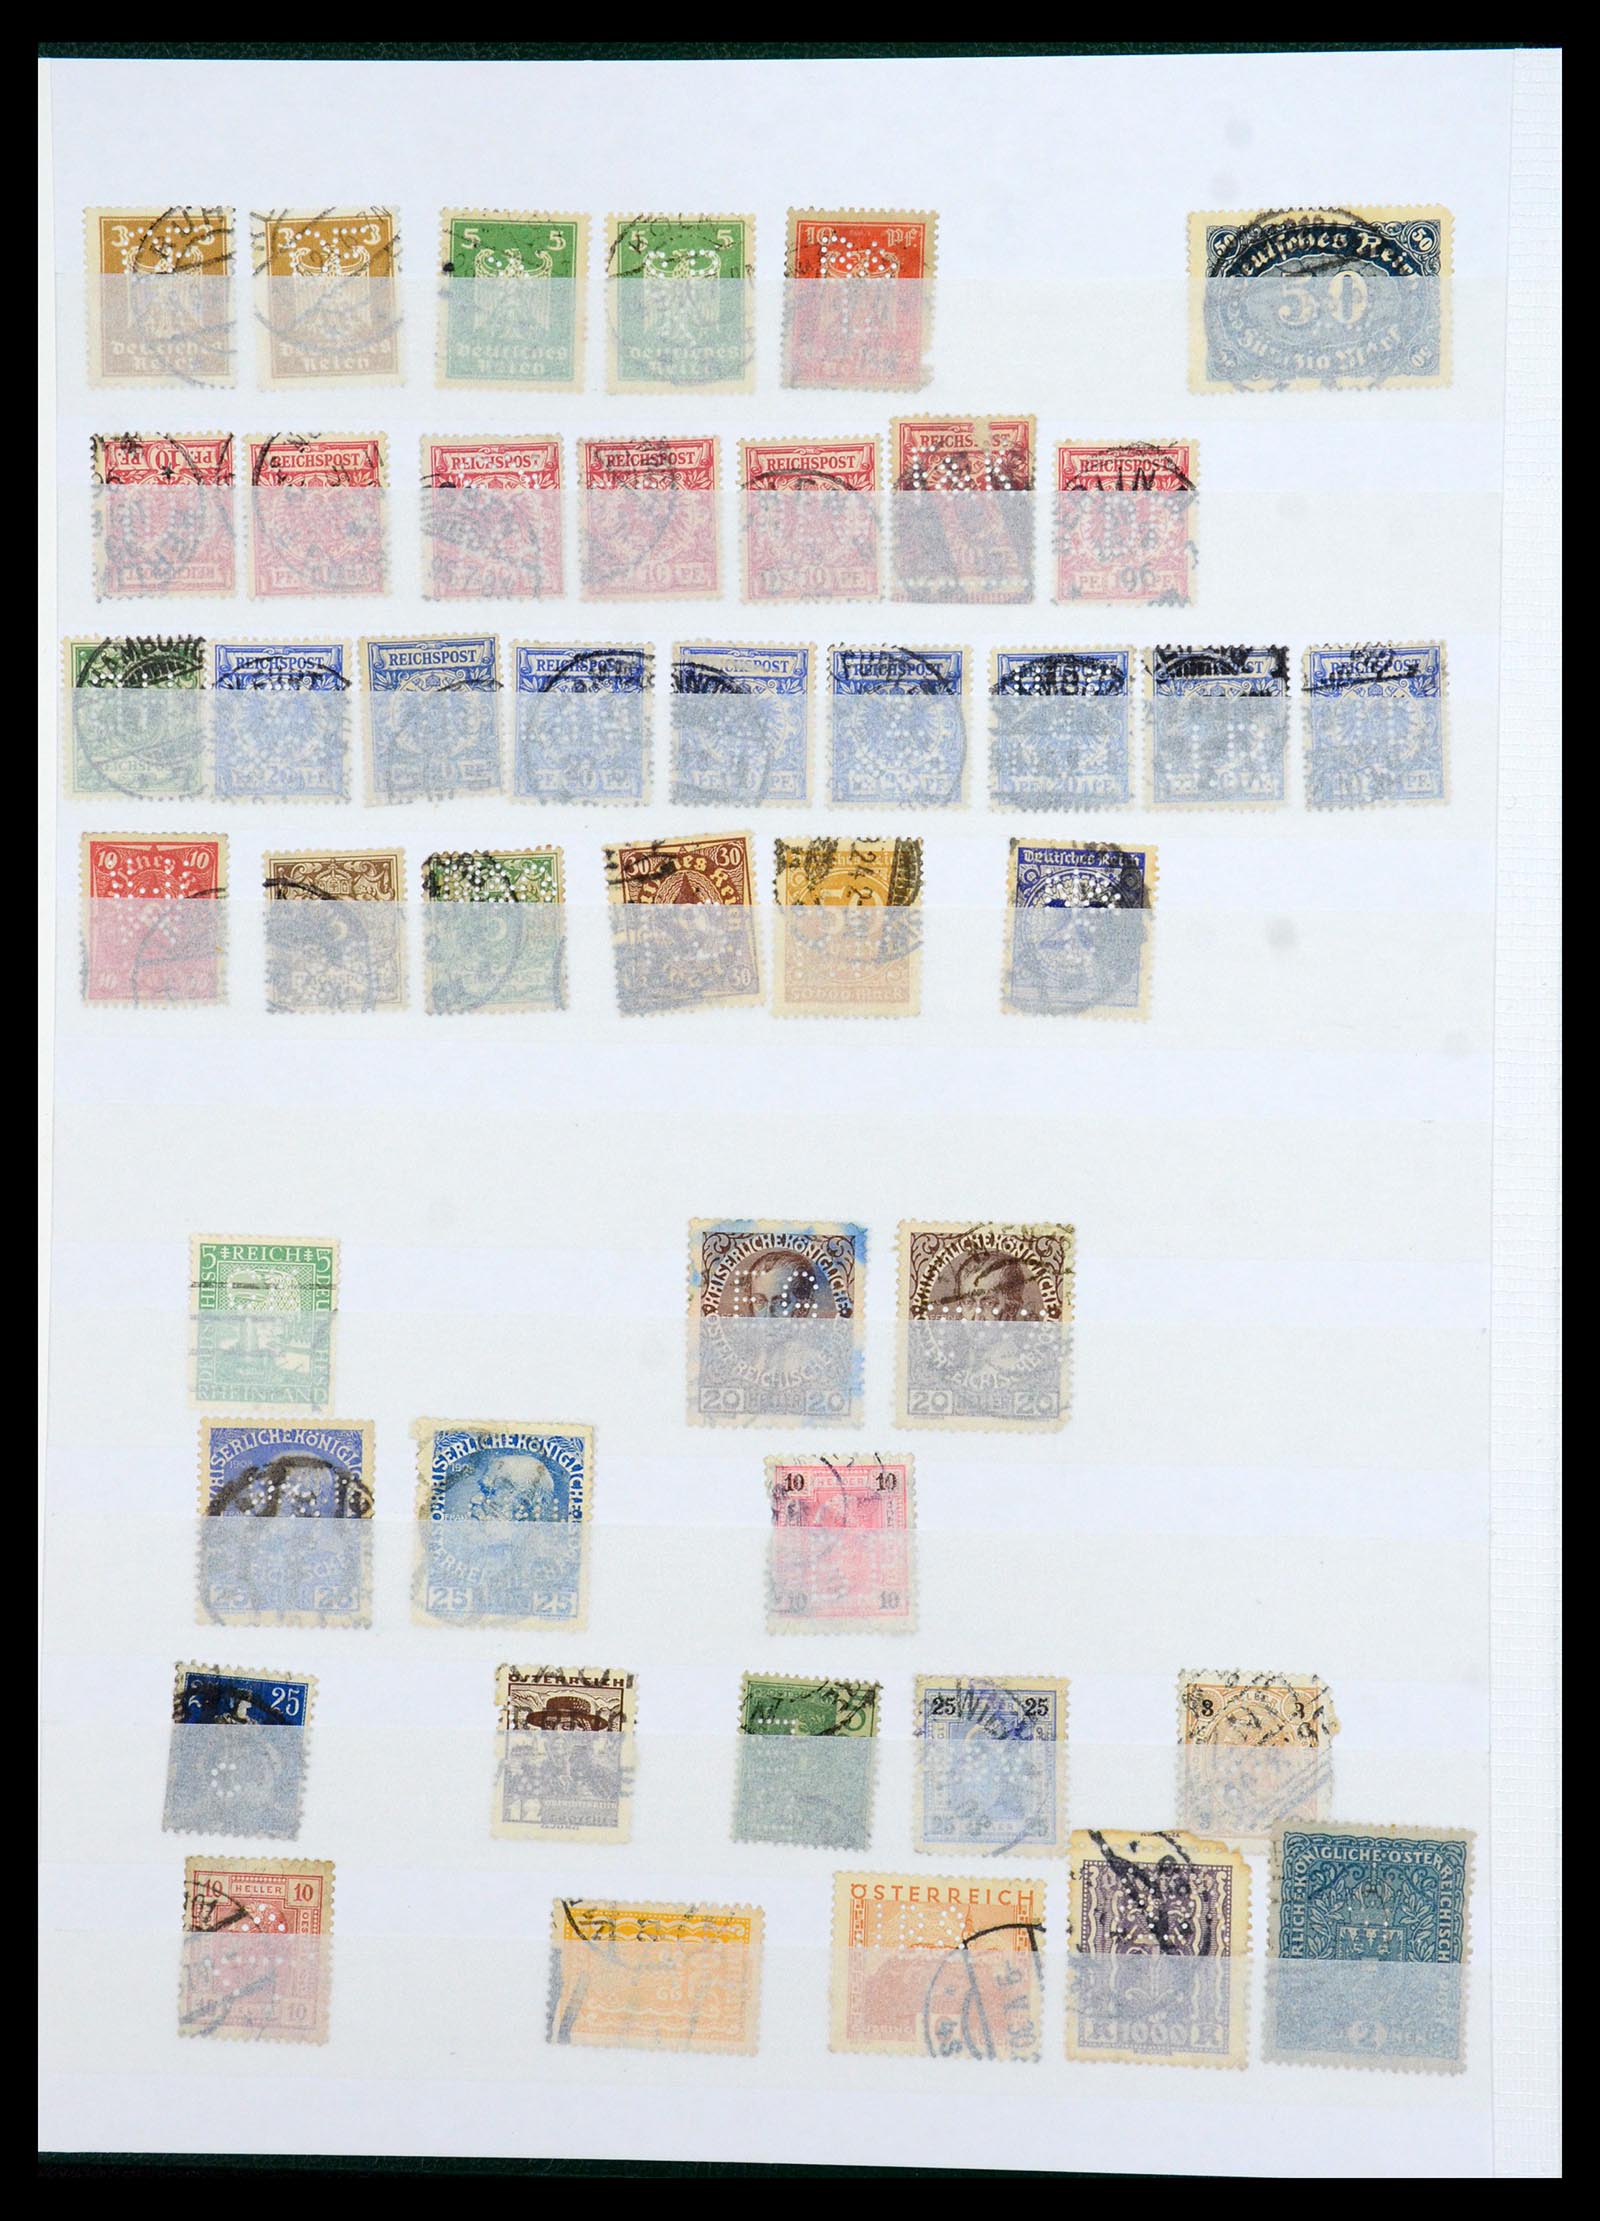 36111 062 - Stamp collection 36111 France perfins 1880-1950.